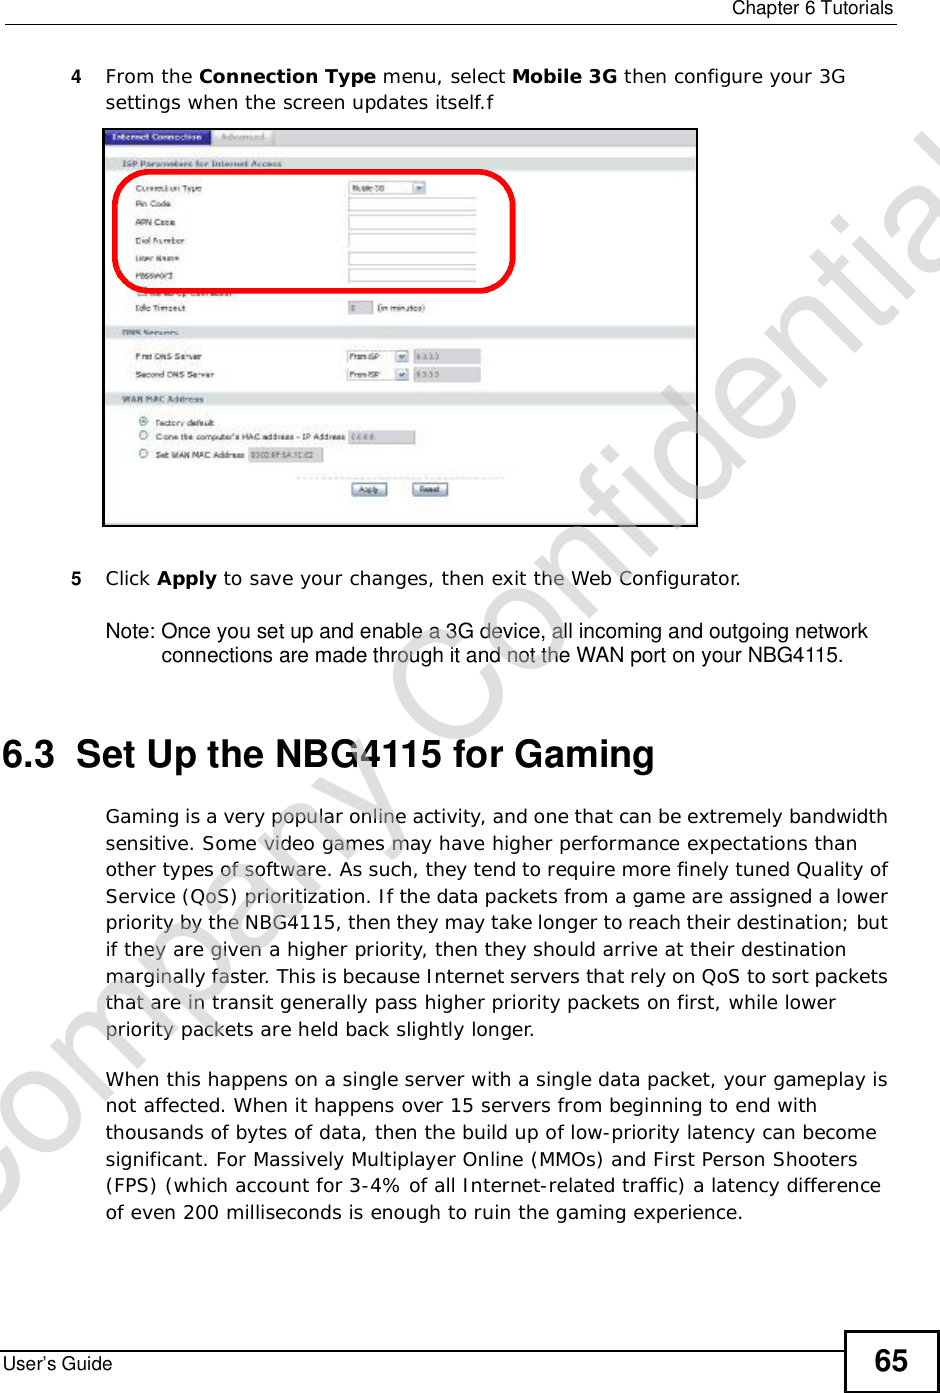  Chapter 6TutorialsUser’s Guide 654From the Connection Type menu, select Mobile 3G then configure your 3G settings when the screen updates itself.f5Click Apply to save your changes, then exit the Web Configurator.Note: Once you set up and enable a 3G device, all incoming and outgoing network connections are made through it and not the WAN port on your NBG4115.6.3  Set Up the NBG4115 for GamingGaming is a very popular online activity, and one that can be extremely bandwidth sensitive. Some video games may have higher performance expectations than other types of software. As such, they tend to require more finely tuned Quality of Service (QoS) prioritization. If the data packets from a game are assigned a lower priority by the NBG4115, then they may take longer to reach their destination; but if they are given a higher priority, then they should arrive at their destination marginally faster. This is because Internet servers that rely on QoS to sort packets that are in transit generally pass higher priority packets on first, while lower priority packets are held back slightly longer.When this happens on a single server with a single data packet, your gameplay is not affected. When it happens over 15 servers from beginning to end with thousands of bytes of data, then the build up of low-priority latency can become significant. For Massively Multiplayer Online (MMOs) and First Person Shooters (FPS) (which account for 3-4% of all Internet-related traffic) a latency difference of even 200 milliseconds is enough to ruin the gaming experience.Company Confidential